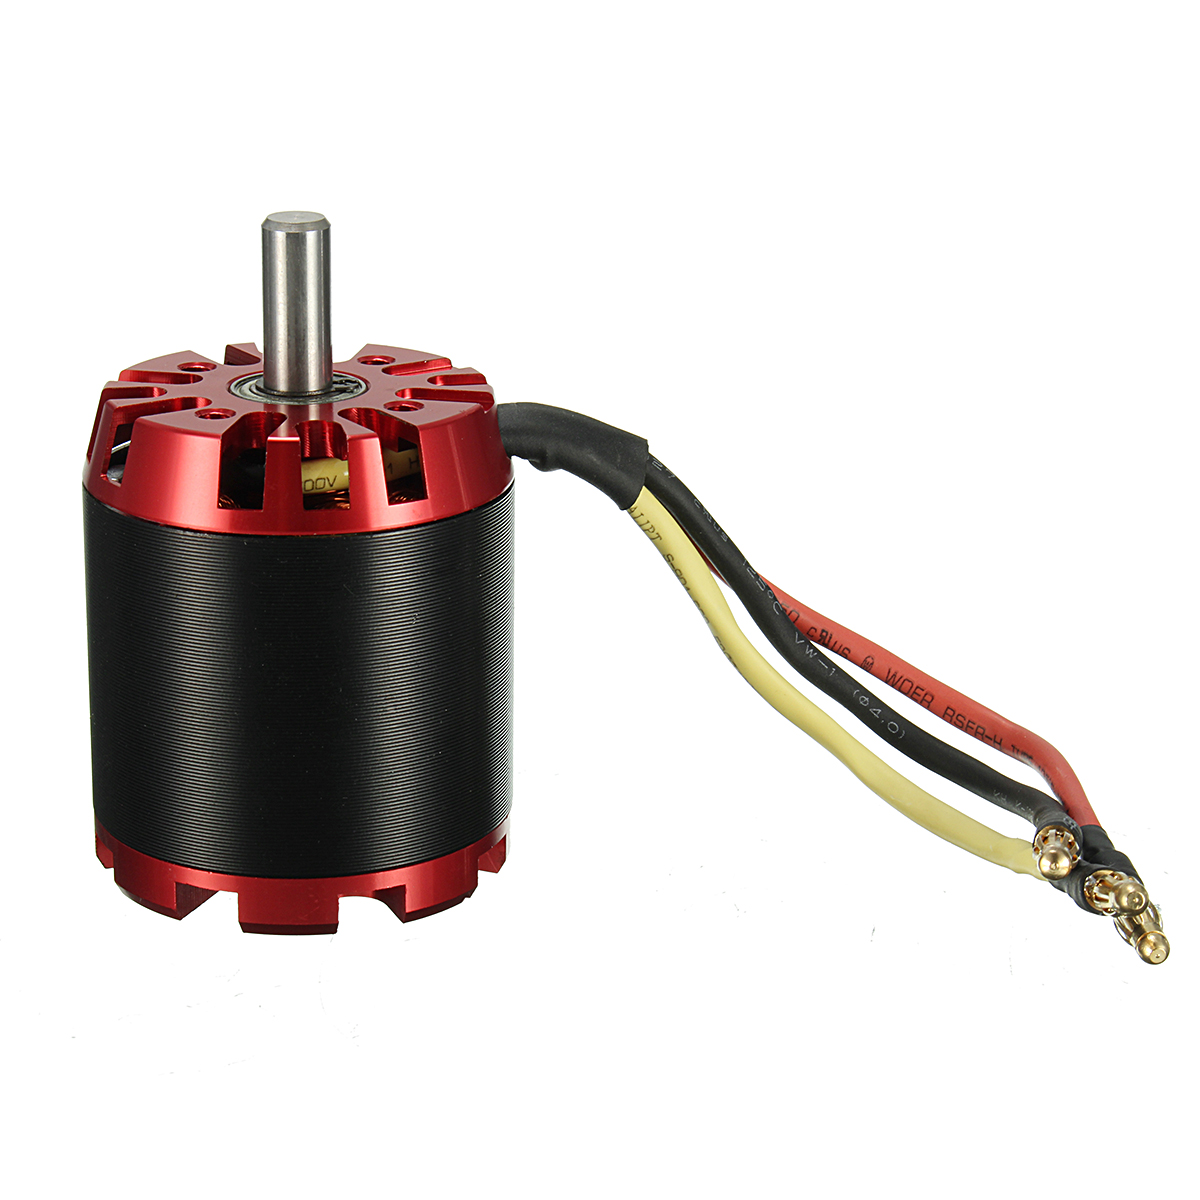 N5065 270KV 1800W 6480RPM/M Outrunner Brushless Motor for Electric Scooter Skate Board DIY Kit - Auto GoShop